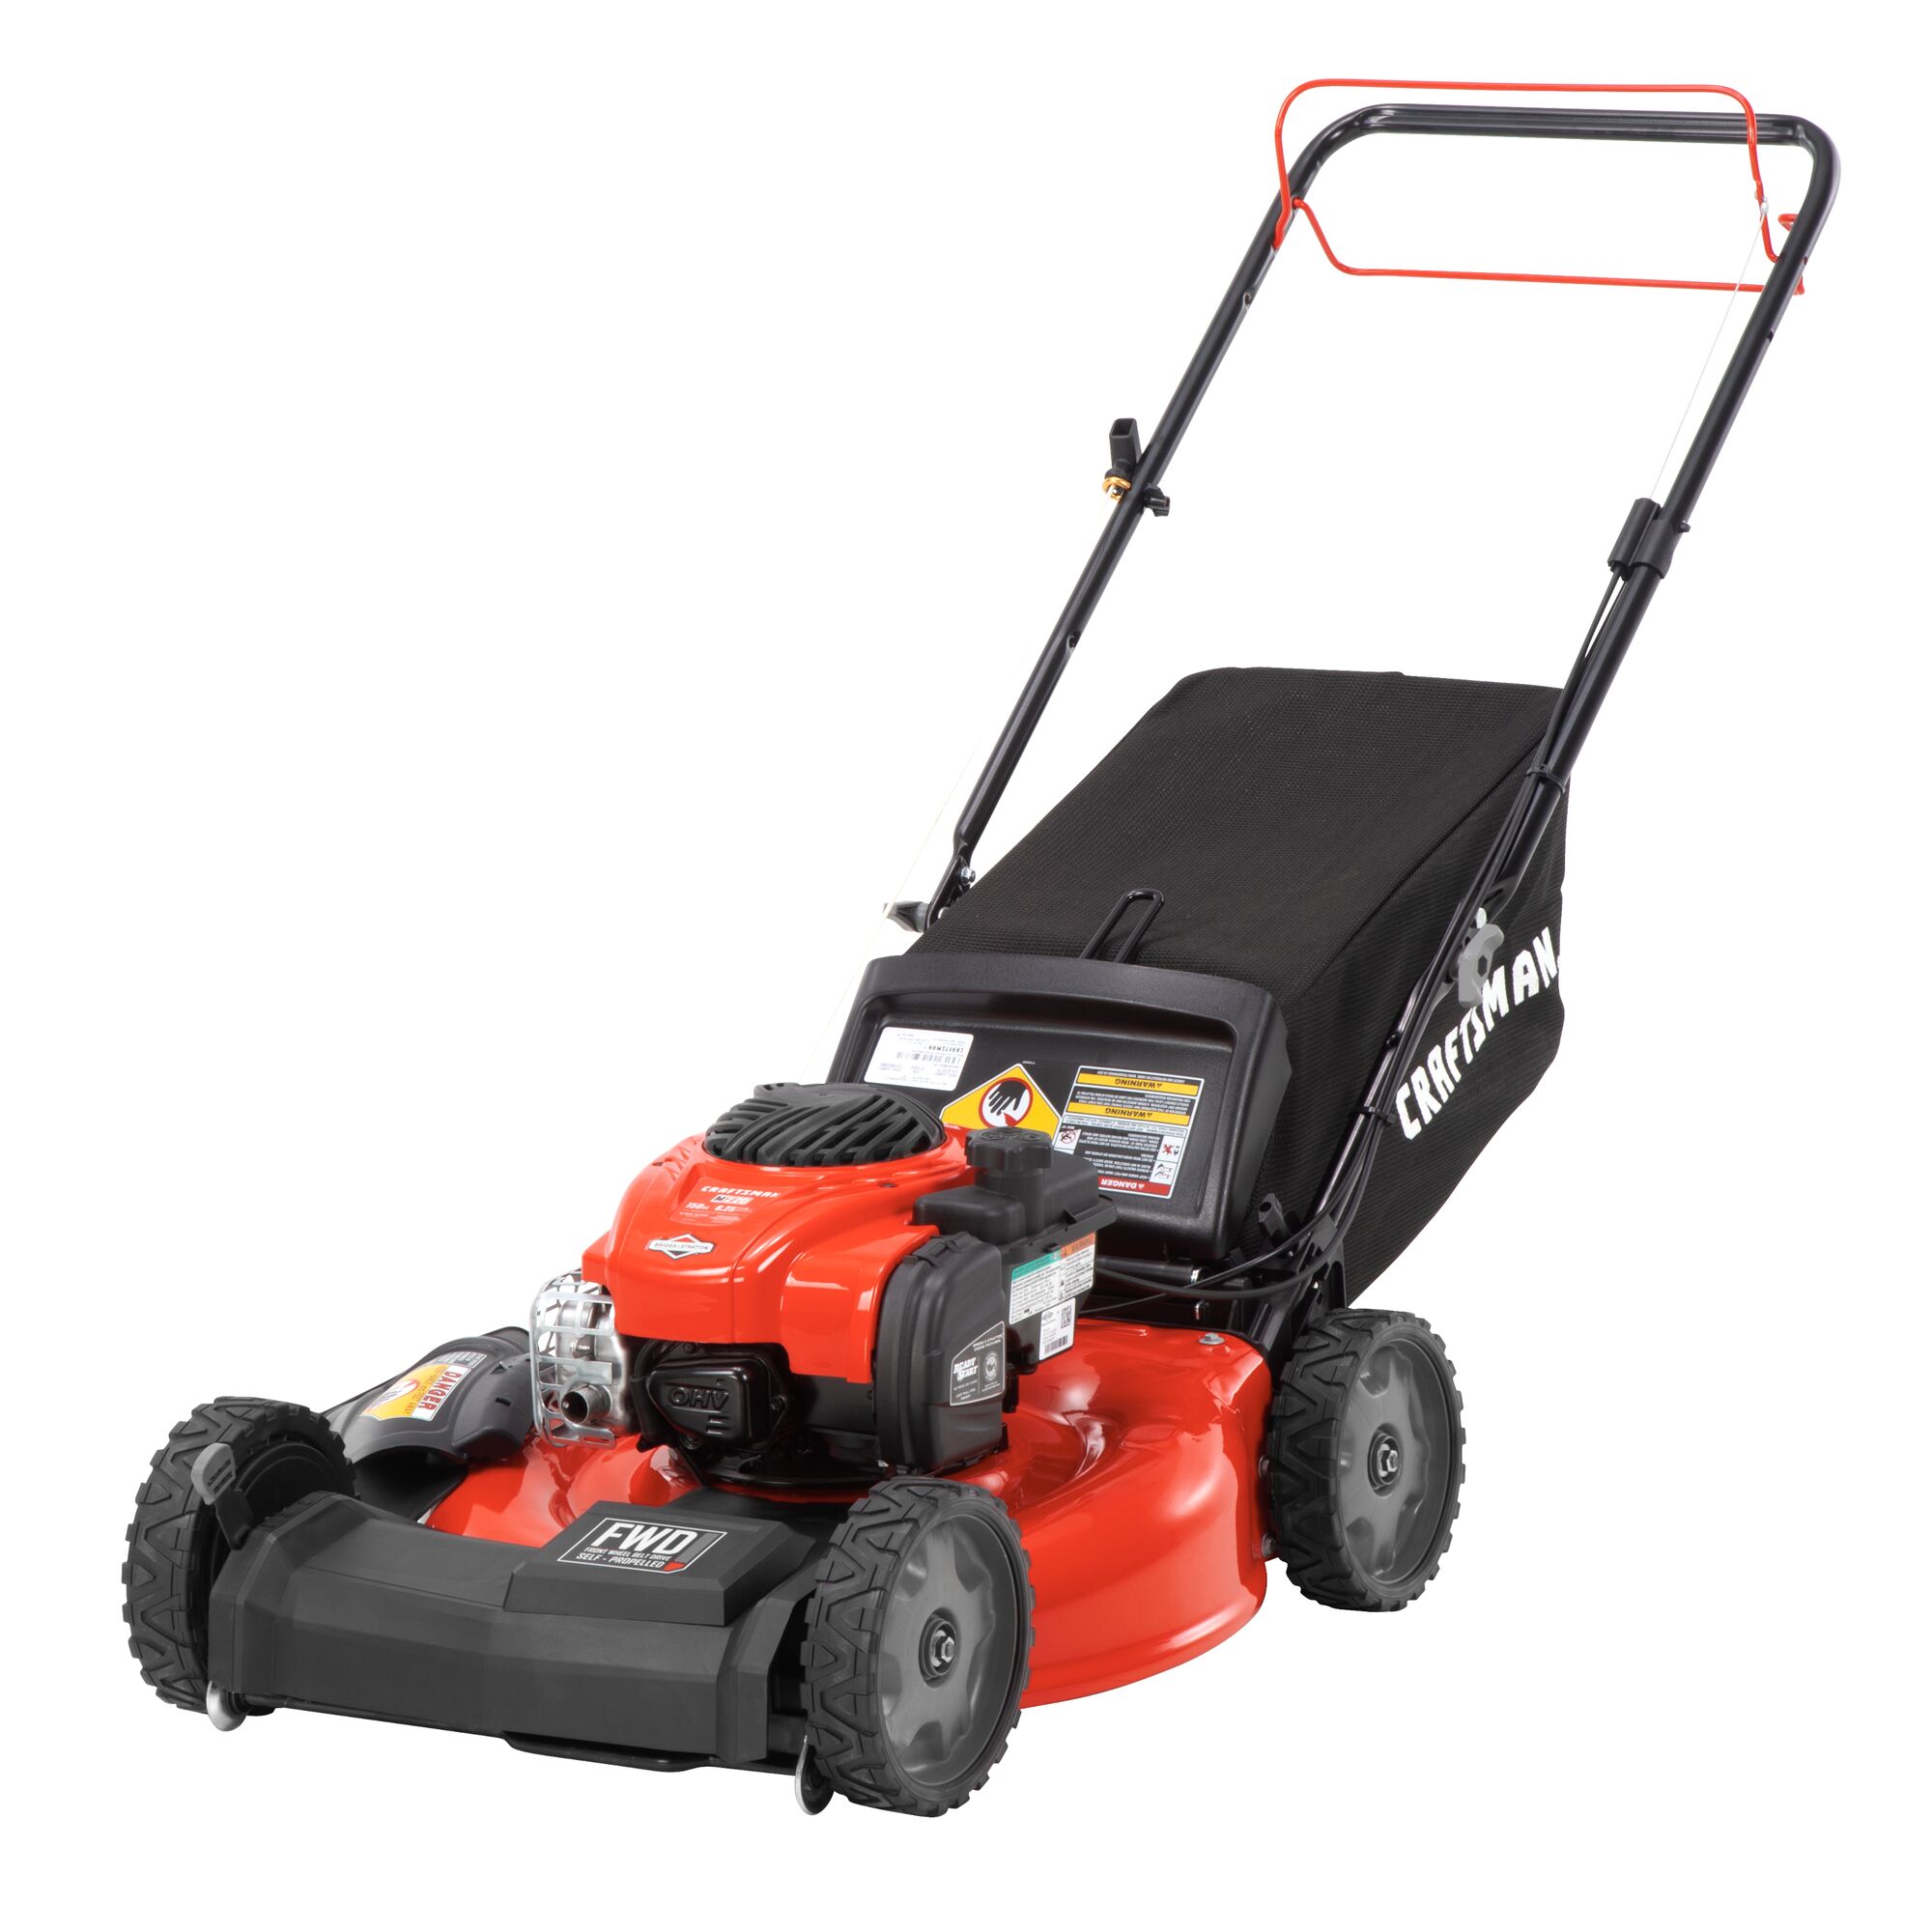 CRAFTSMAN M220 150cc 21-in. Self-propelled Gas Push Lawn Mower on white background.